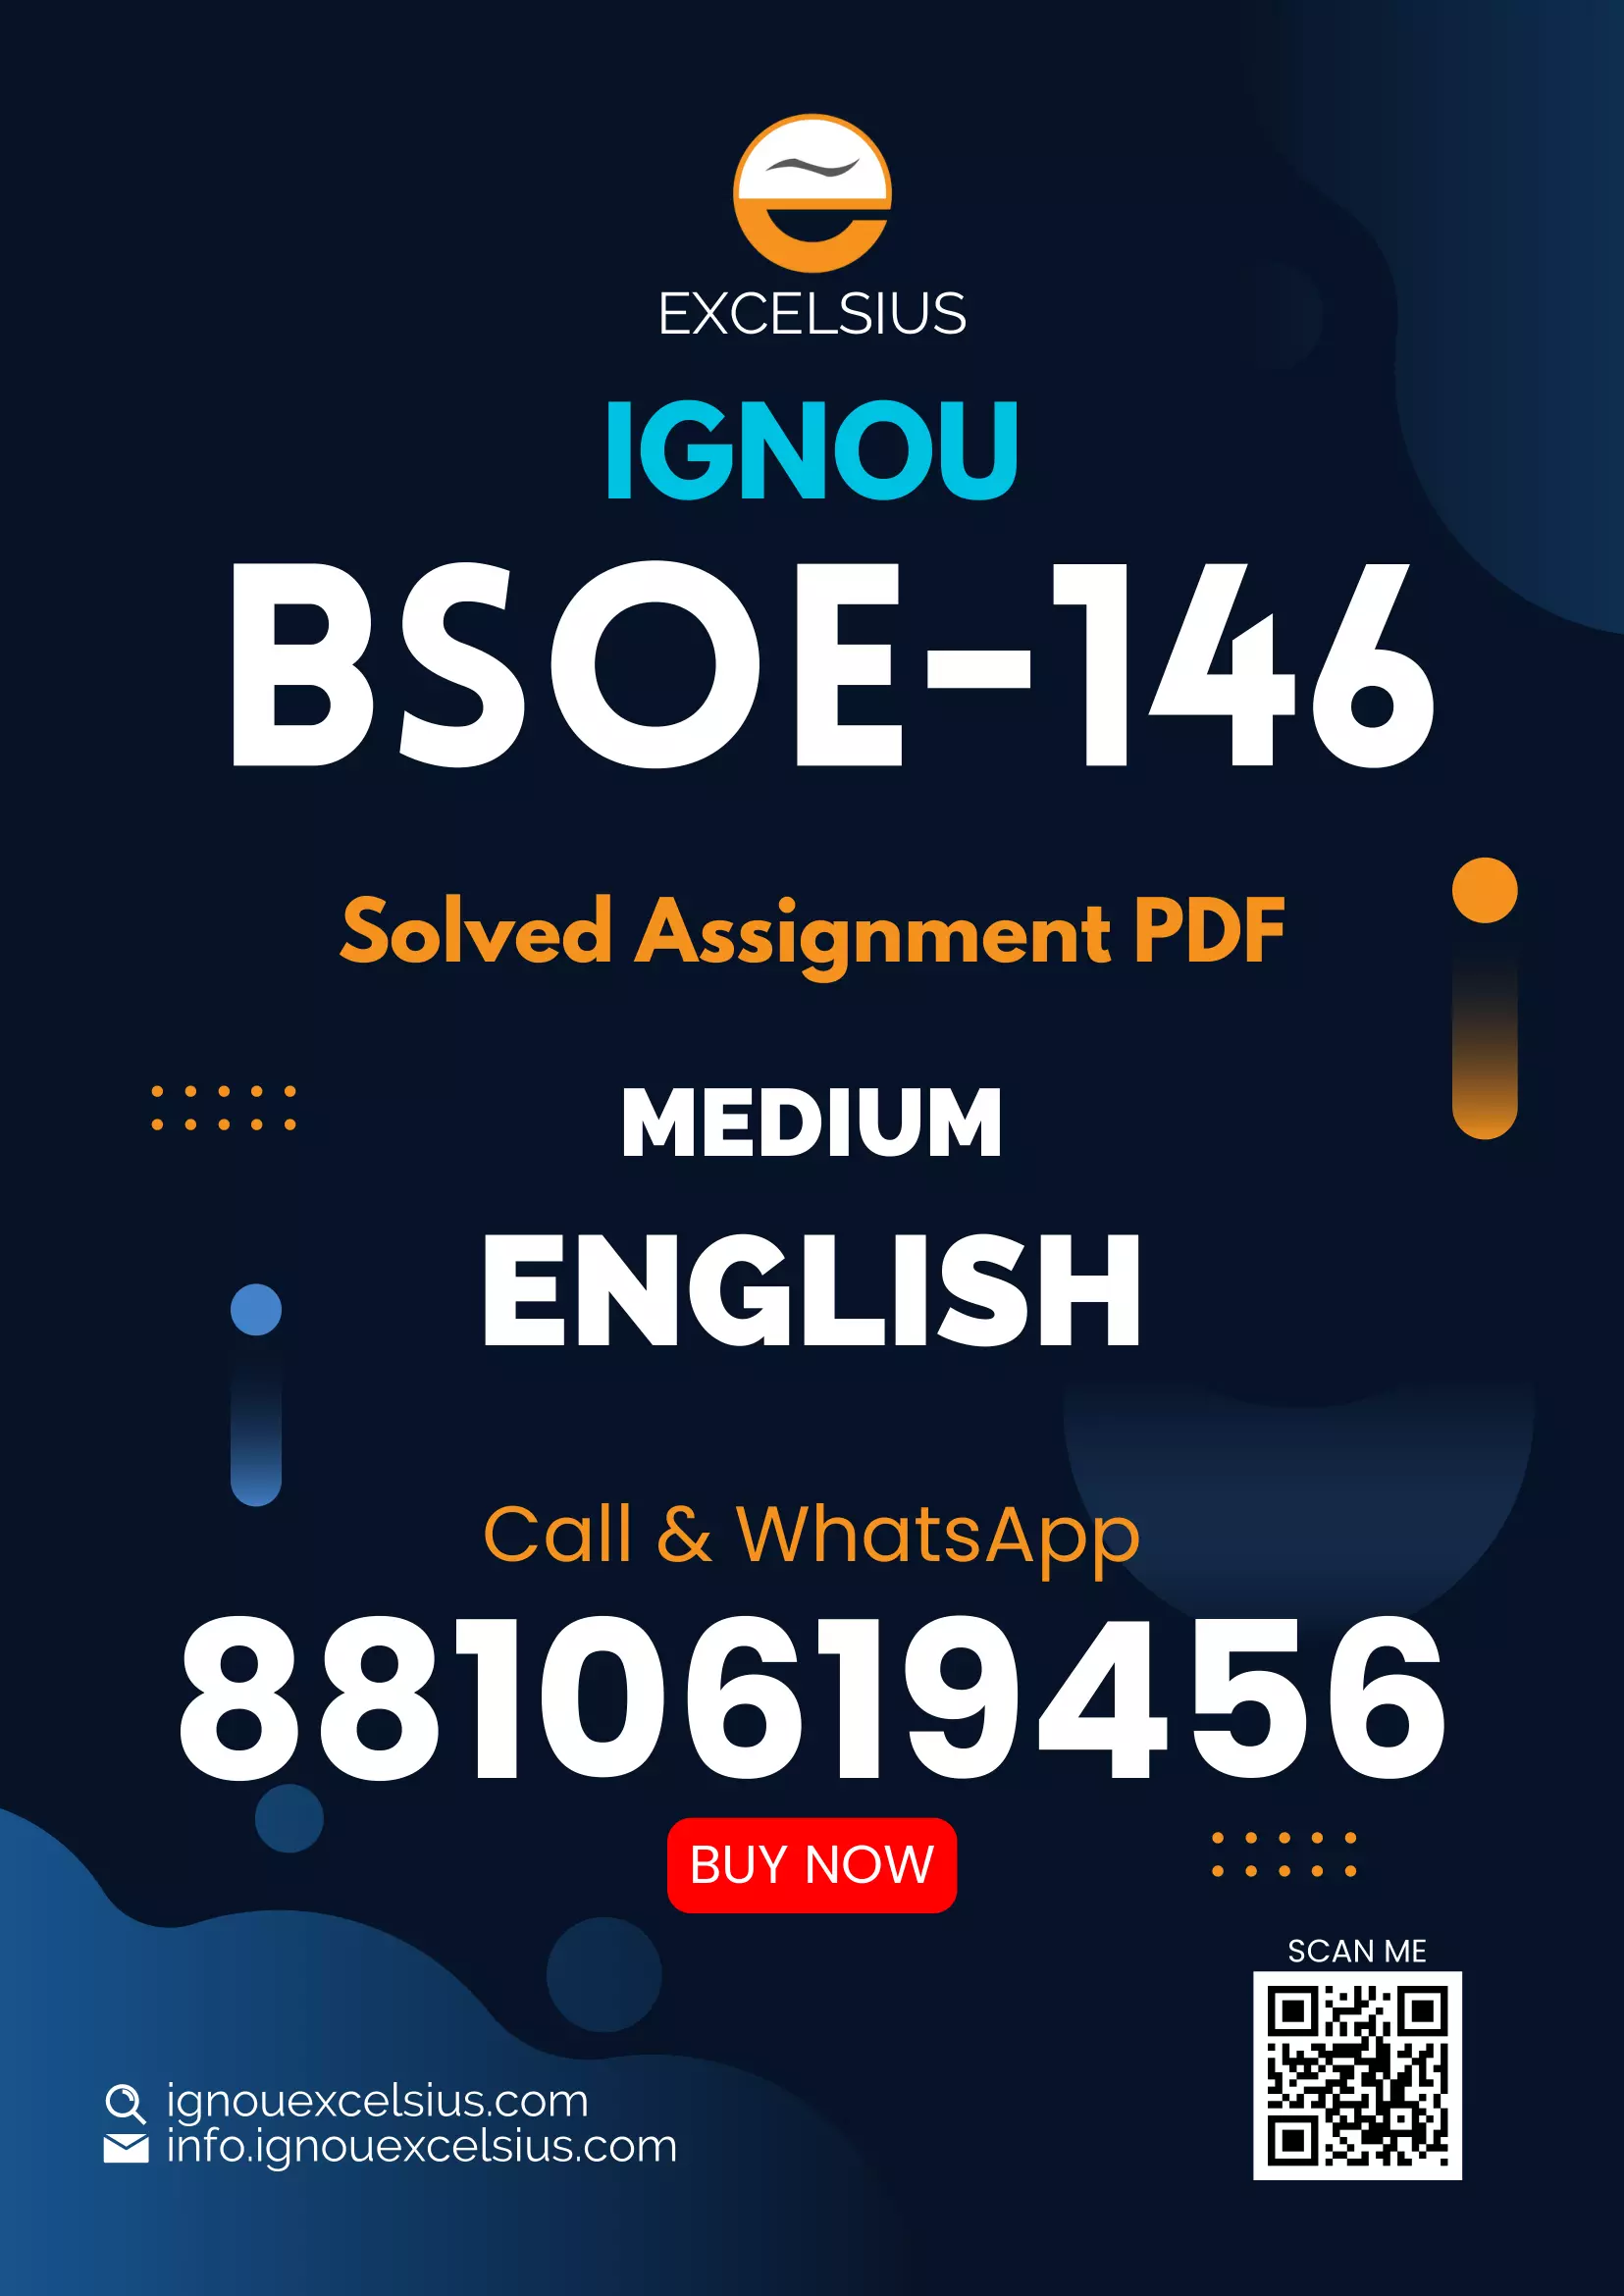 IGNOU BSOE-146 - Marriage, Family and Kinship, Latest Solved Assignment-July 2023 - January 2024